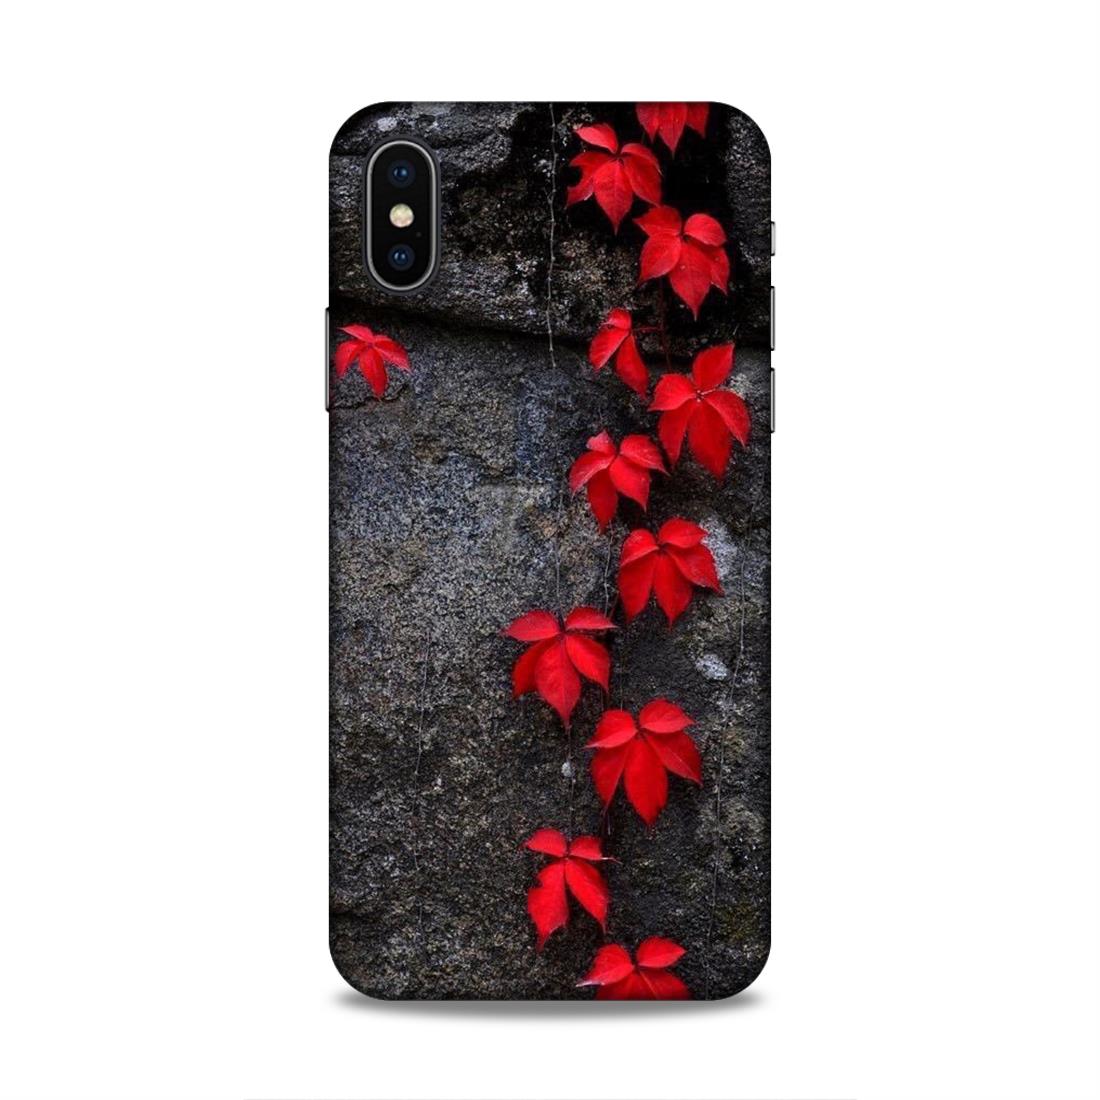 Red Leaf Series Hard Back Case For Apple iPhone X/XS